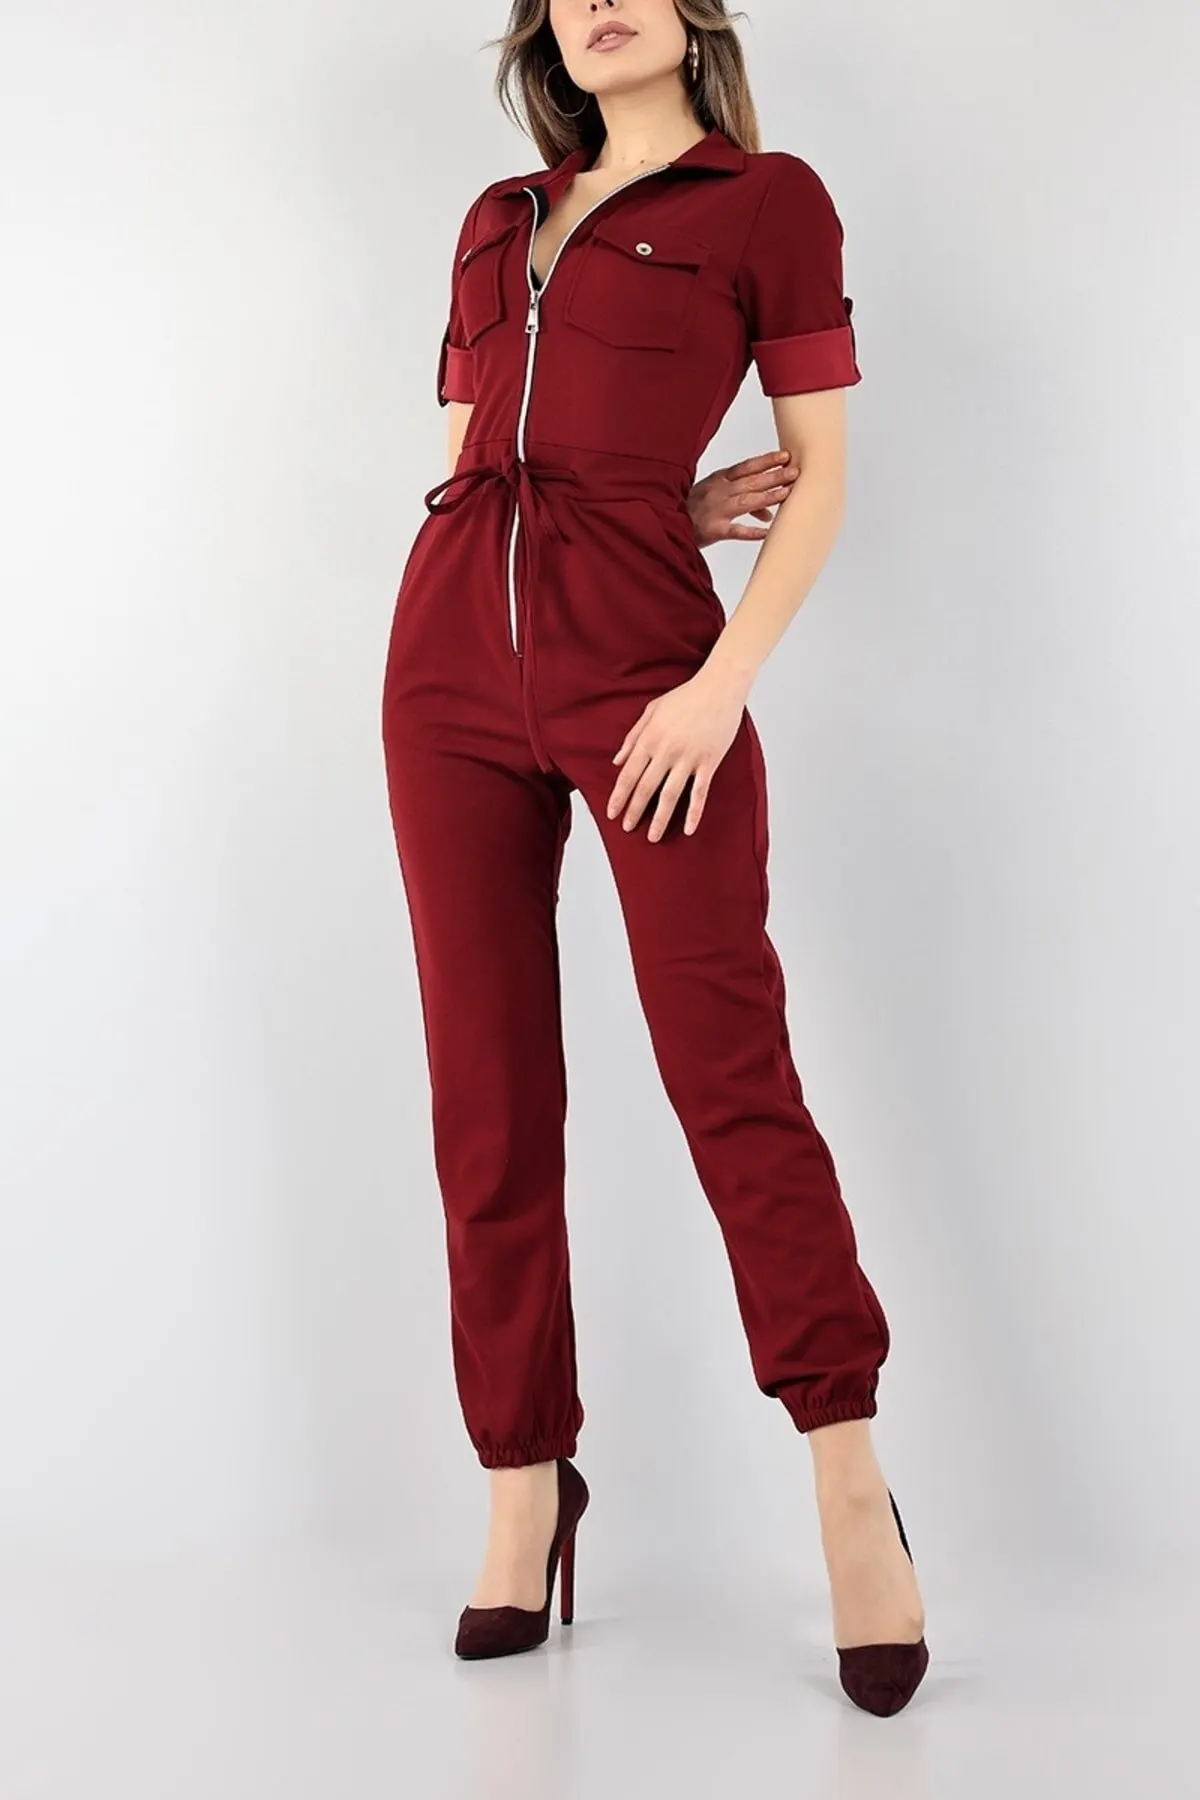 

Women's Overalls Claret Red Zippered Crepe Jumpsuit Q Hot Style Quality Fabric Sleeveless Baggy Trousers Casual Jumpsuit